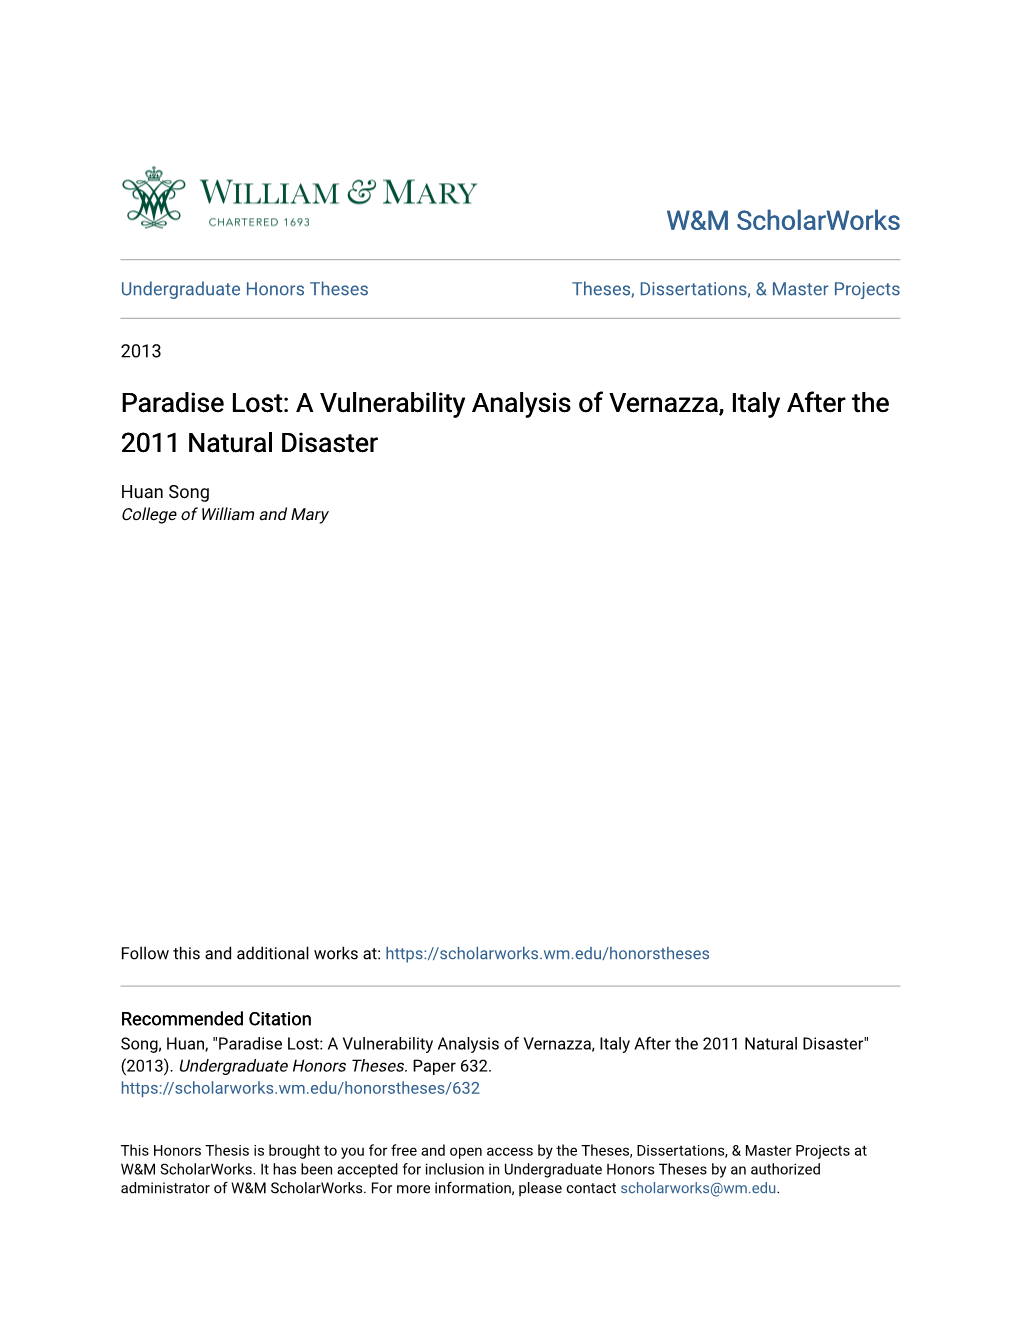 A Vulnerability Analysis of Vernazza, Italy After the 2011 Natural Disaster